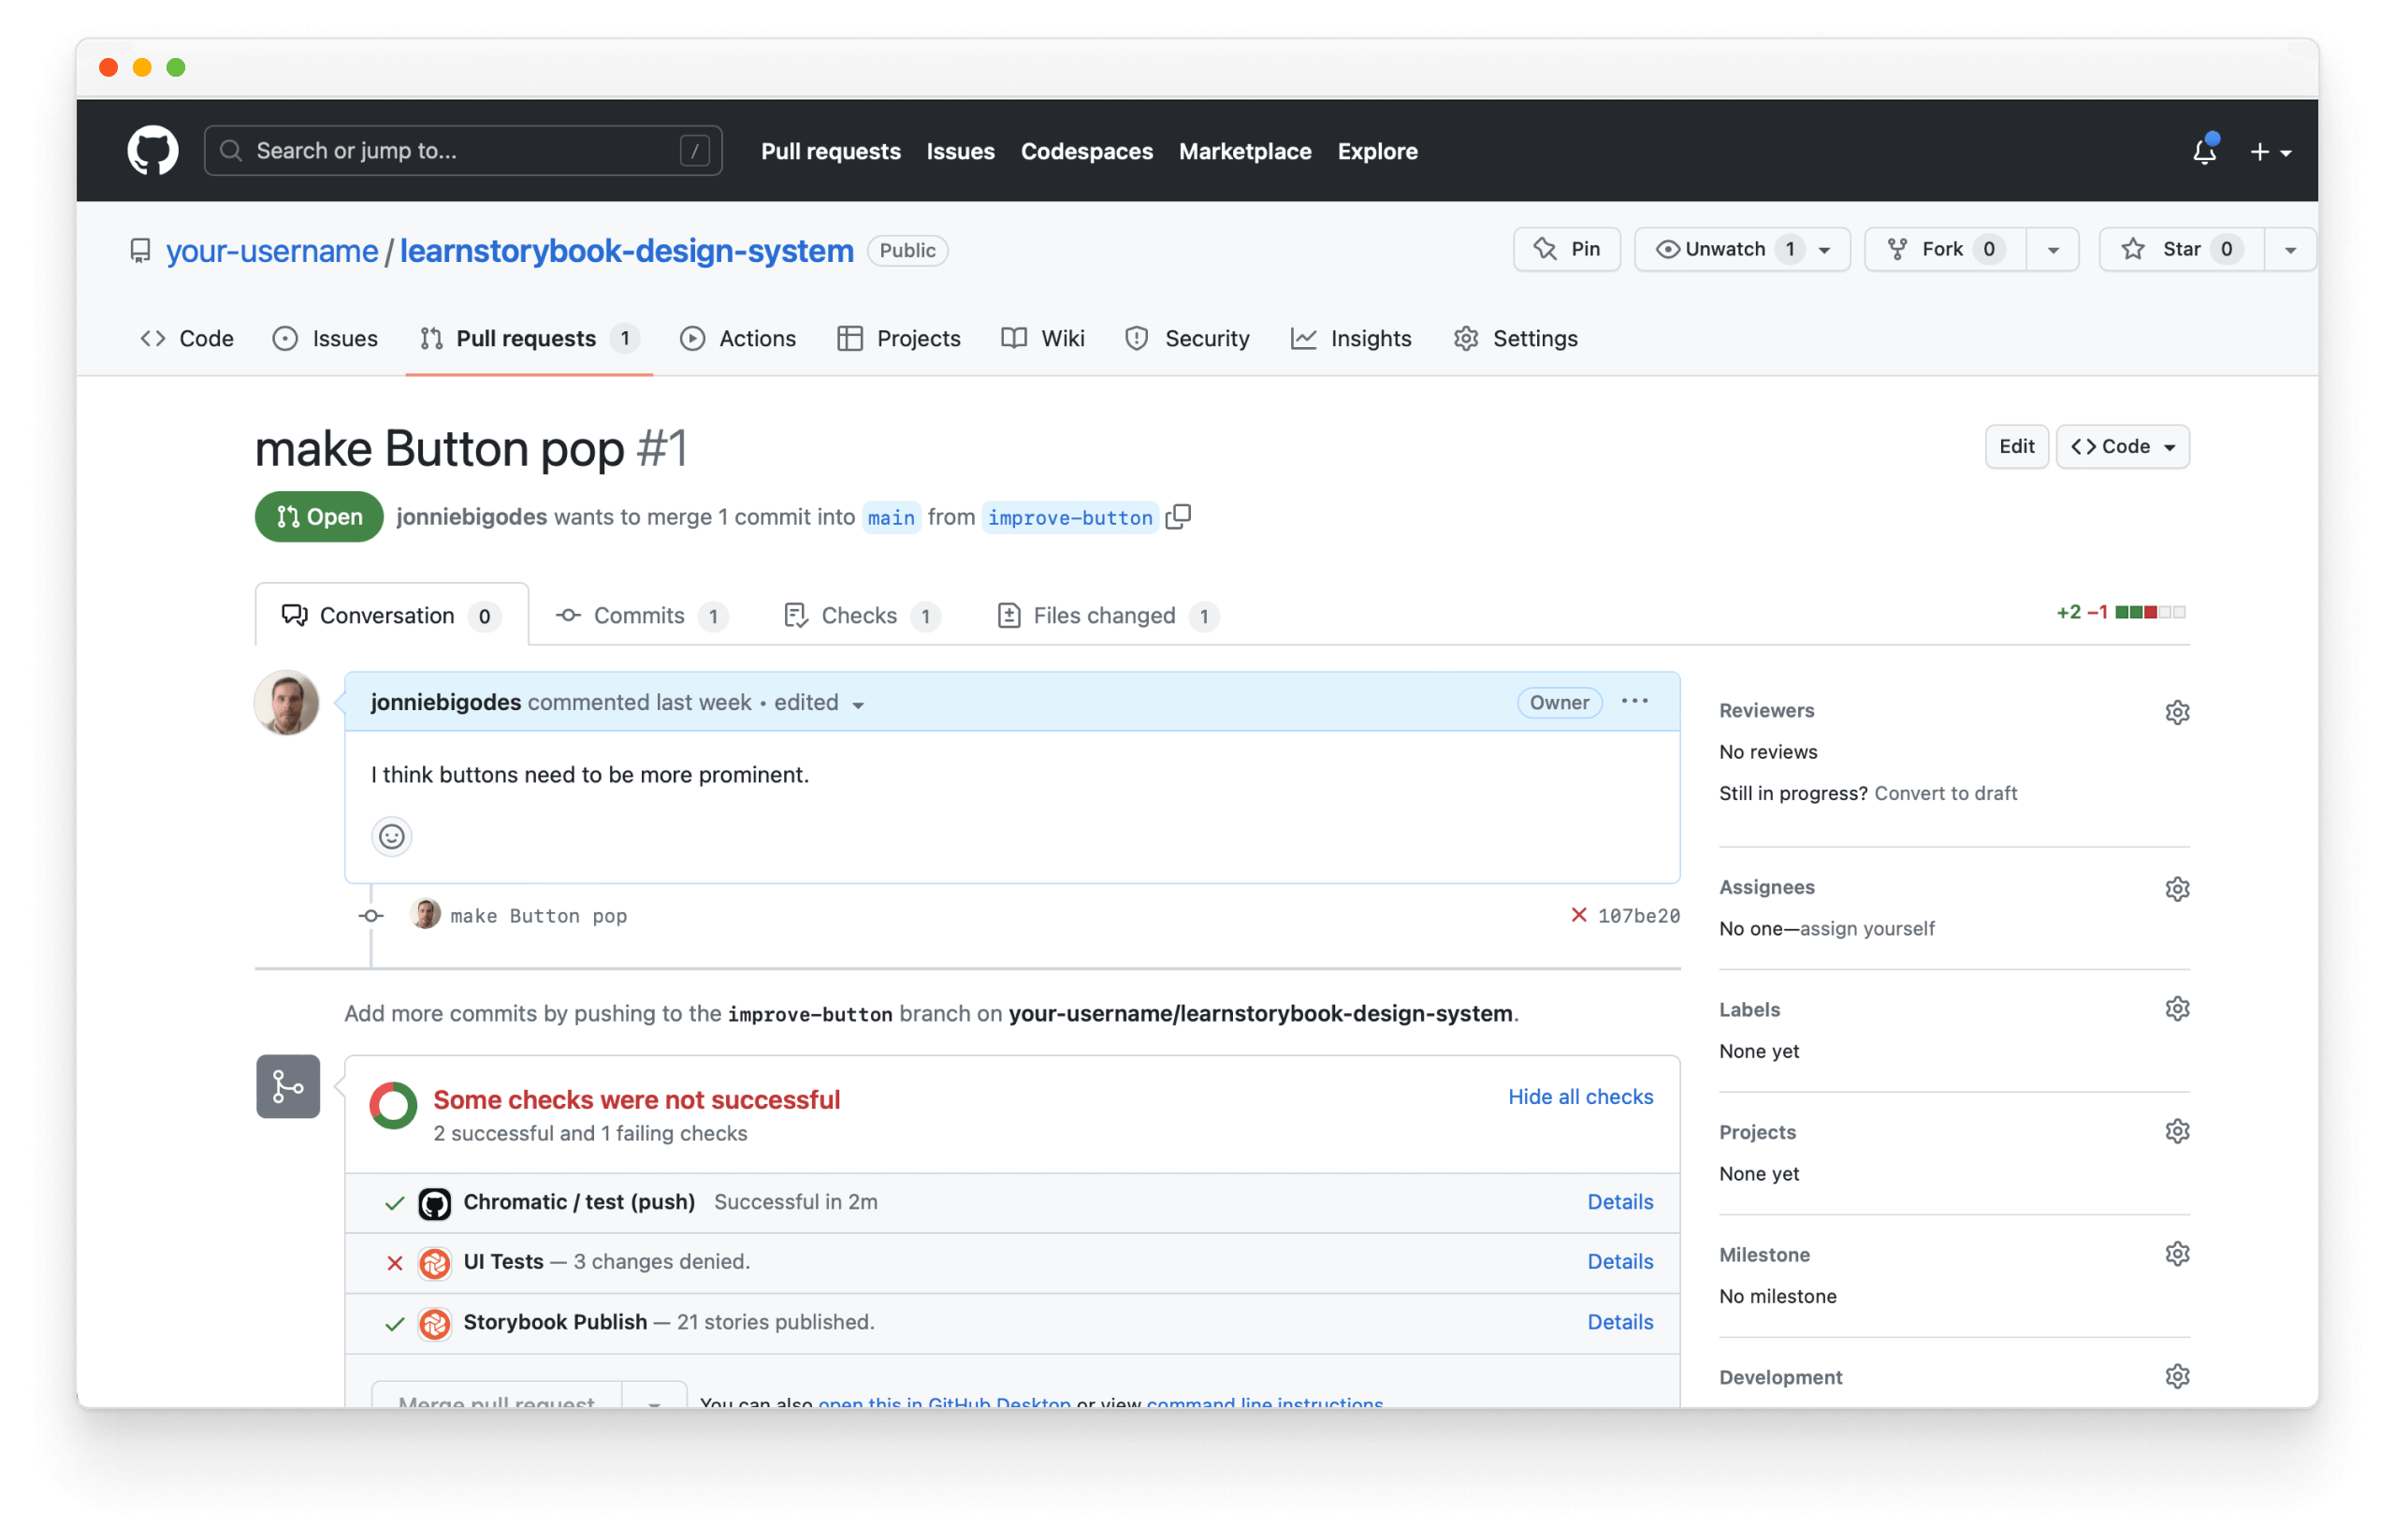 Created a PR in GitHub